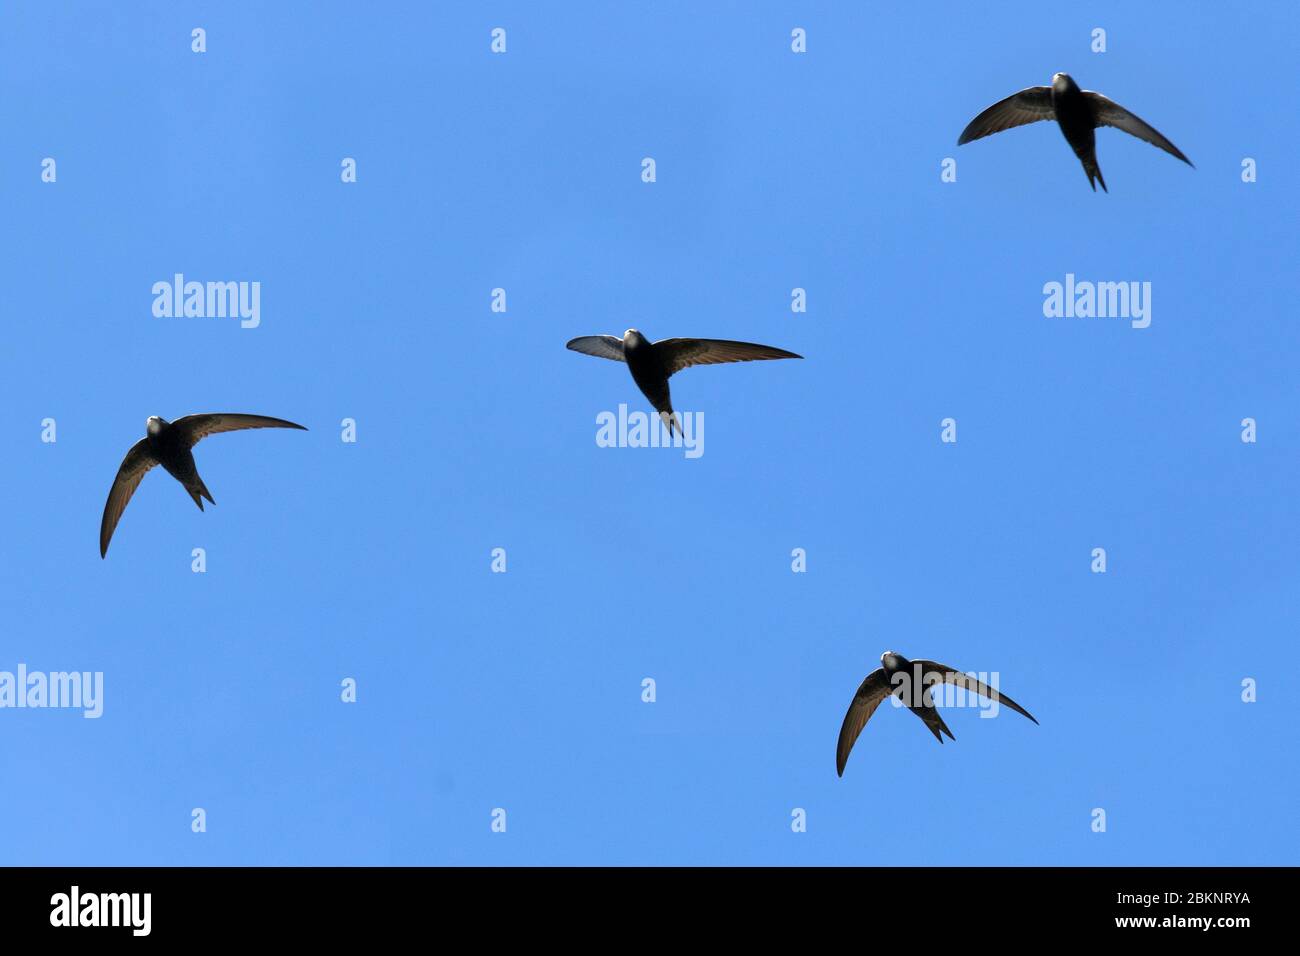 Swifts in flight in Southport, Merseyside.   UK Weather.  May, 2020.  Signs of Summer as Swifts return from Spain and Central Africa on southerly winds to breed in Southport provoking interest by local birdwatchers.  The UK's Swifts have one of the longest migration journeys in the World, 22,000 kilometres (14,000 miles) every year. They fly to and from Equatorial and Southern Africa, using largely unknown routes. Stock Photo